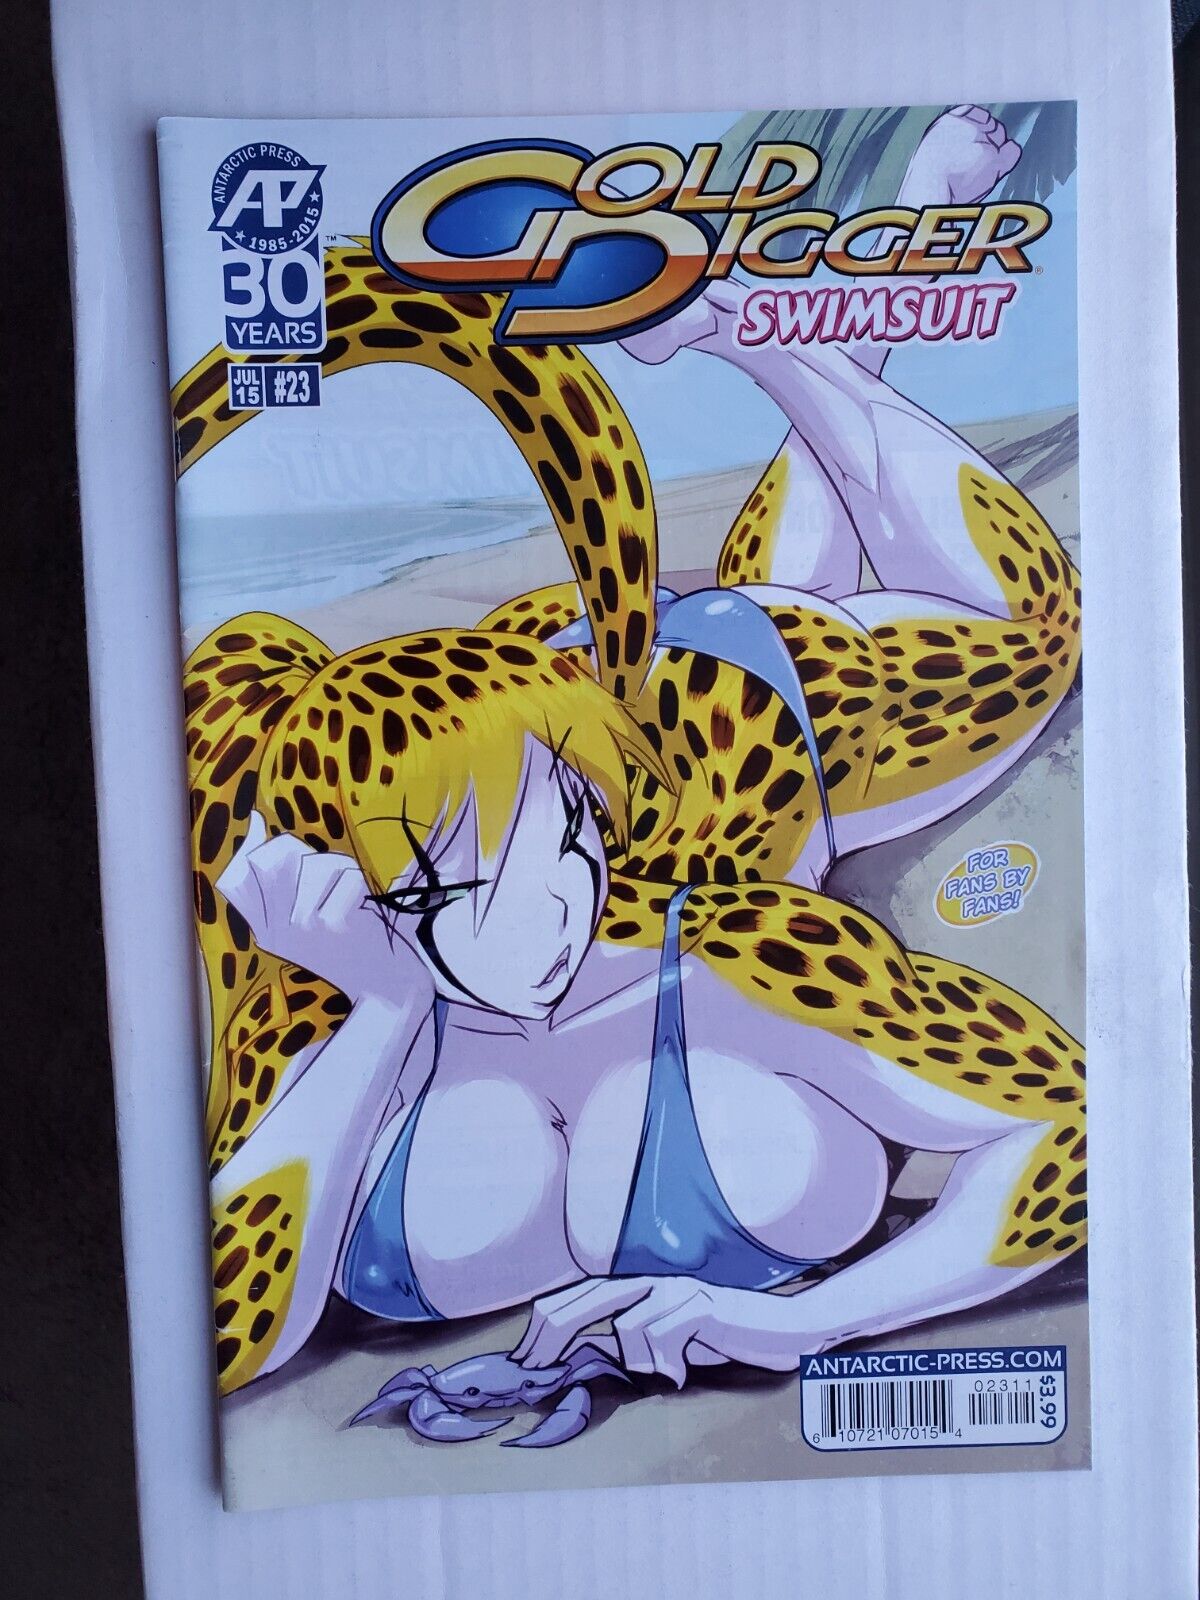 Gold Digger #23 Annual Swimsuit Special Antartic Press 2015 Rare Anthropomorphic